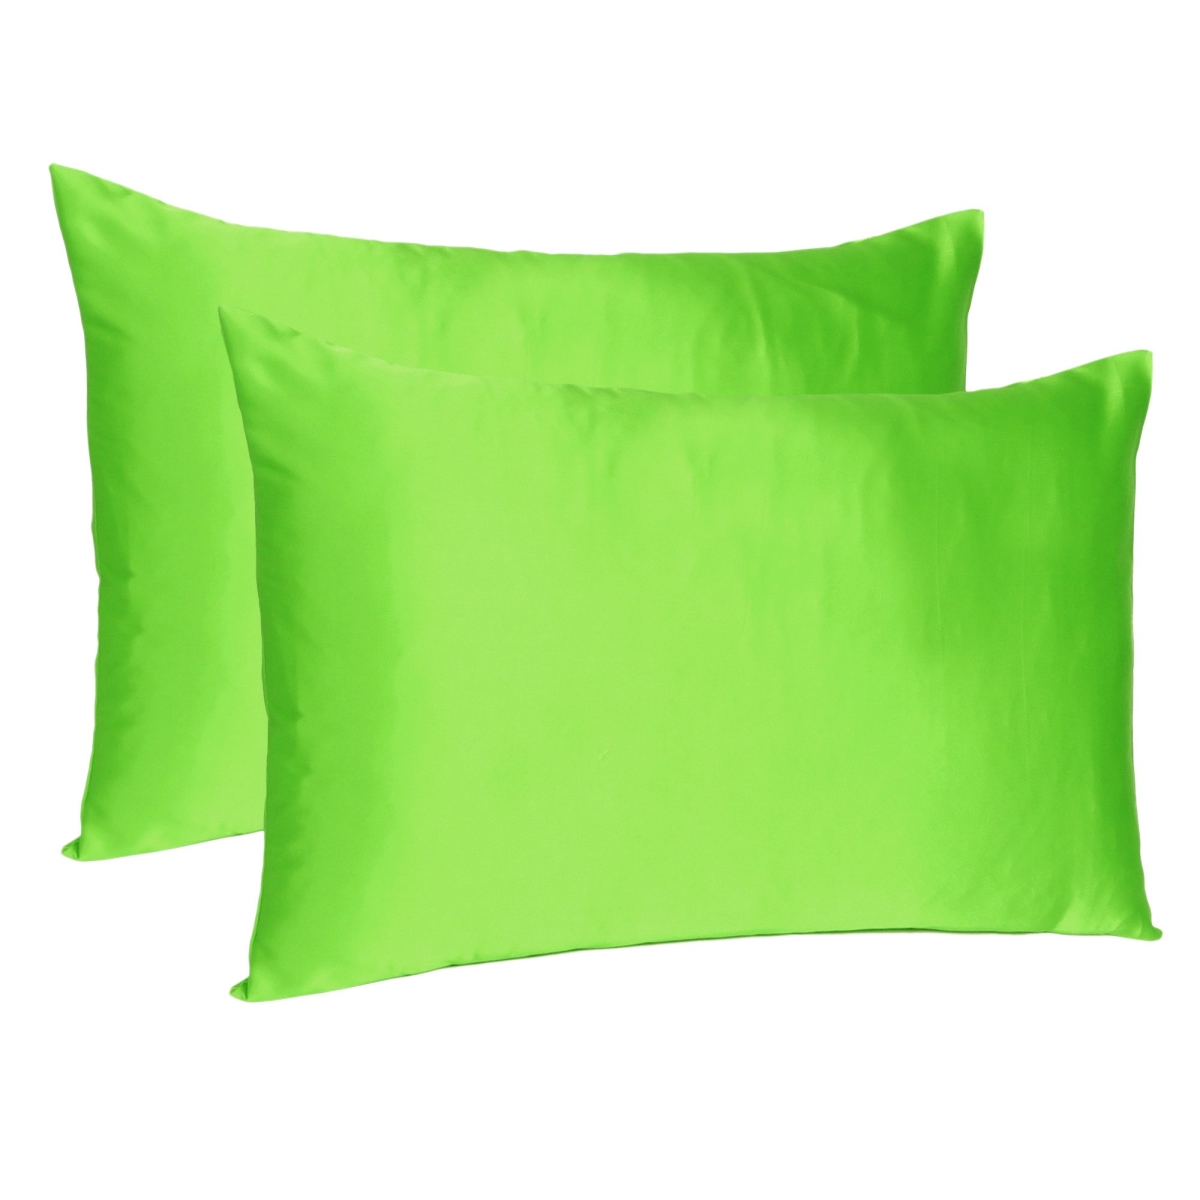 Gfancy Fixtures 20 x 26 in. Bright Green Dreamy Silky Satin Standard Size Pillowcases